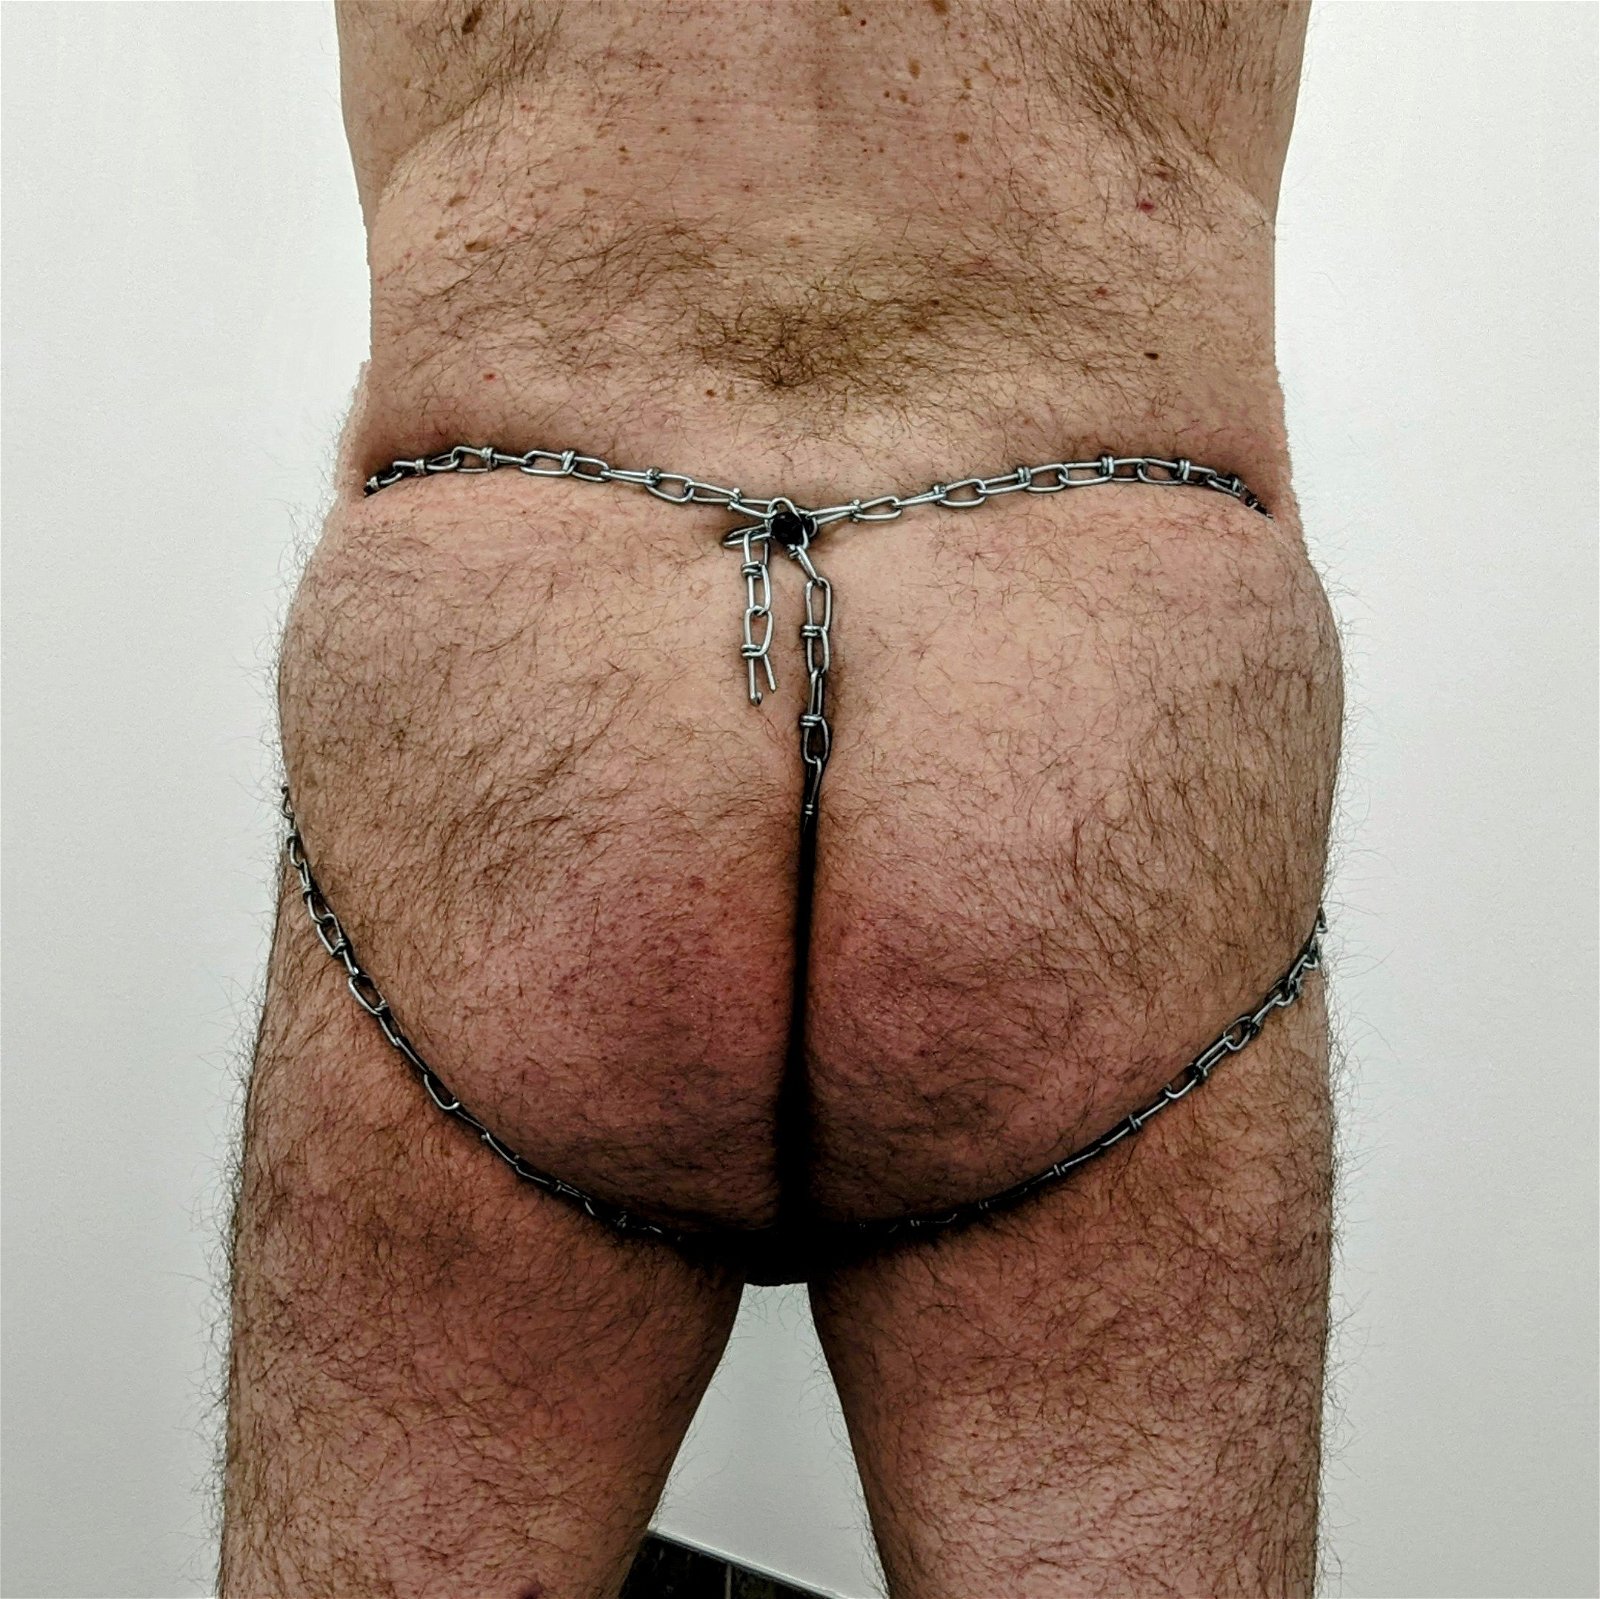 Photo by Cautious Curious with the username @CautiousCurious, who is a verified user,  March 3, 2023 at 10:36 PM. The post is about the topic Gay Bondage and the text says 'Trying out some self bondage with chains.
#me #ass #balls #cock #hairy #bondage #chains #cautiouscurious'